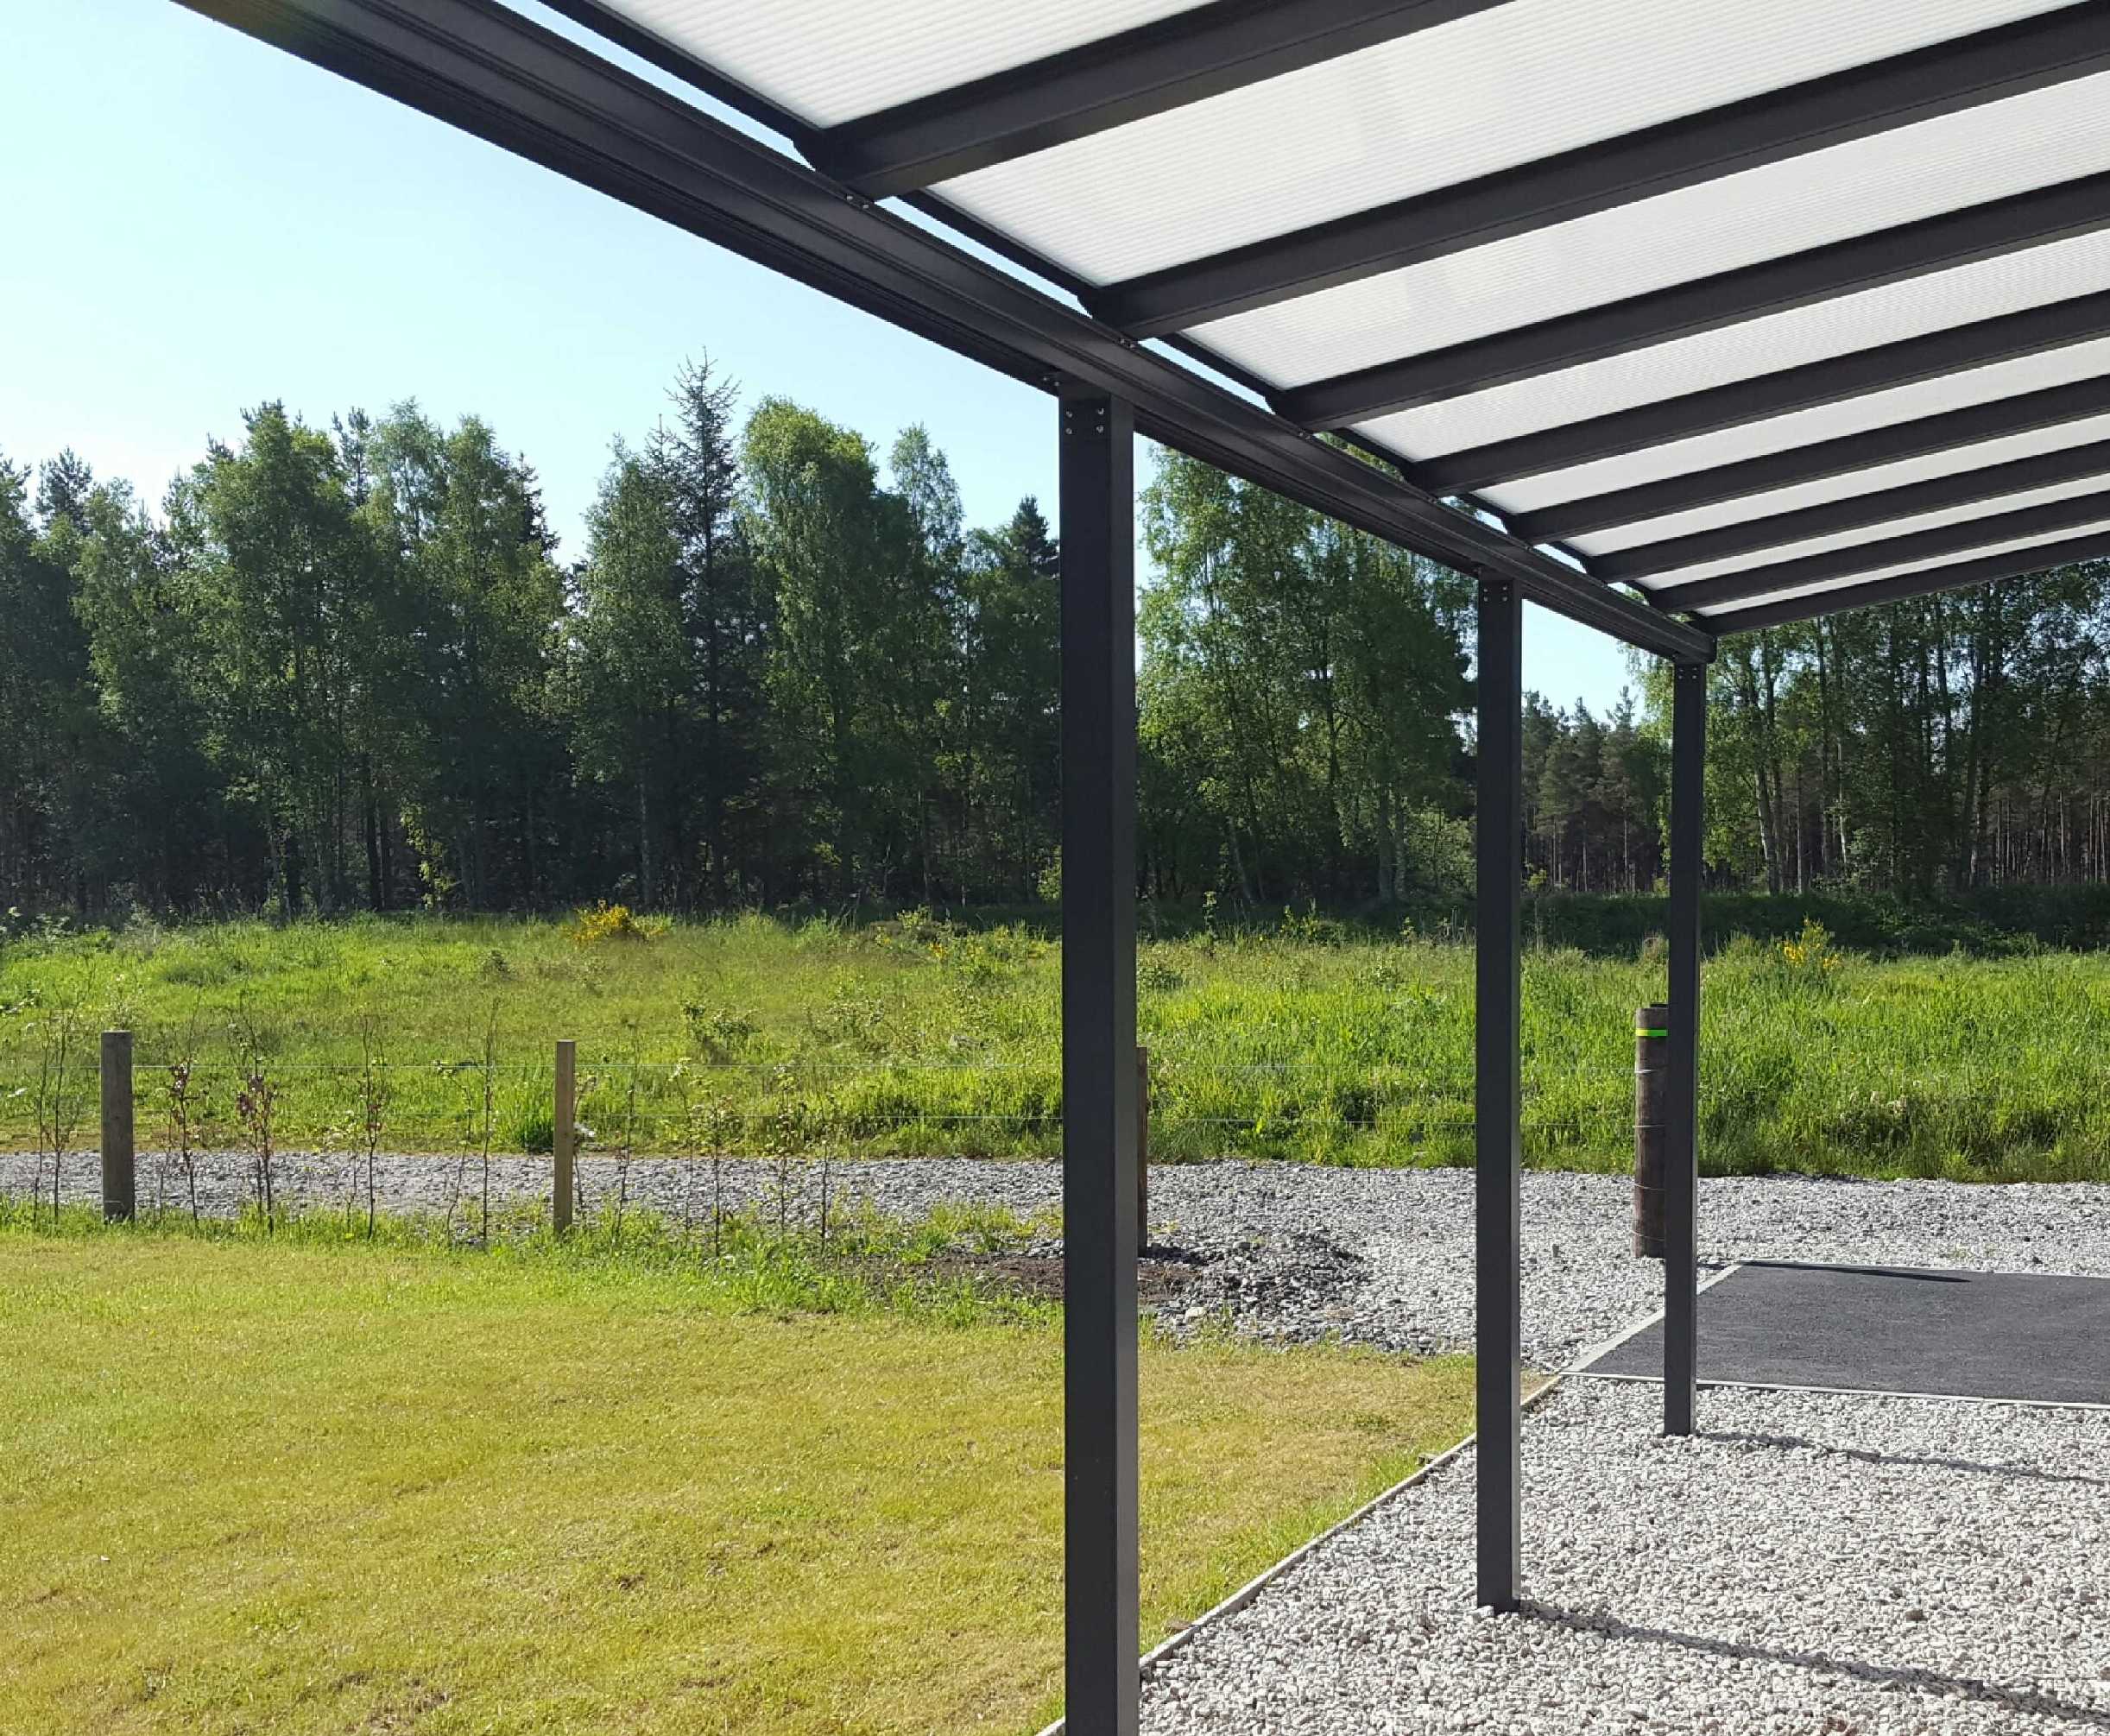 Omega Smart Lean-To Canopy, Anthracite Grey, 6mm Glass Clear Plate Polycarbonate Glazing - 10.5m (W) x 2.0m (P), (5) Supporting Posts